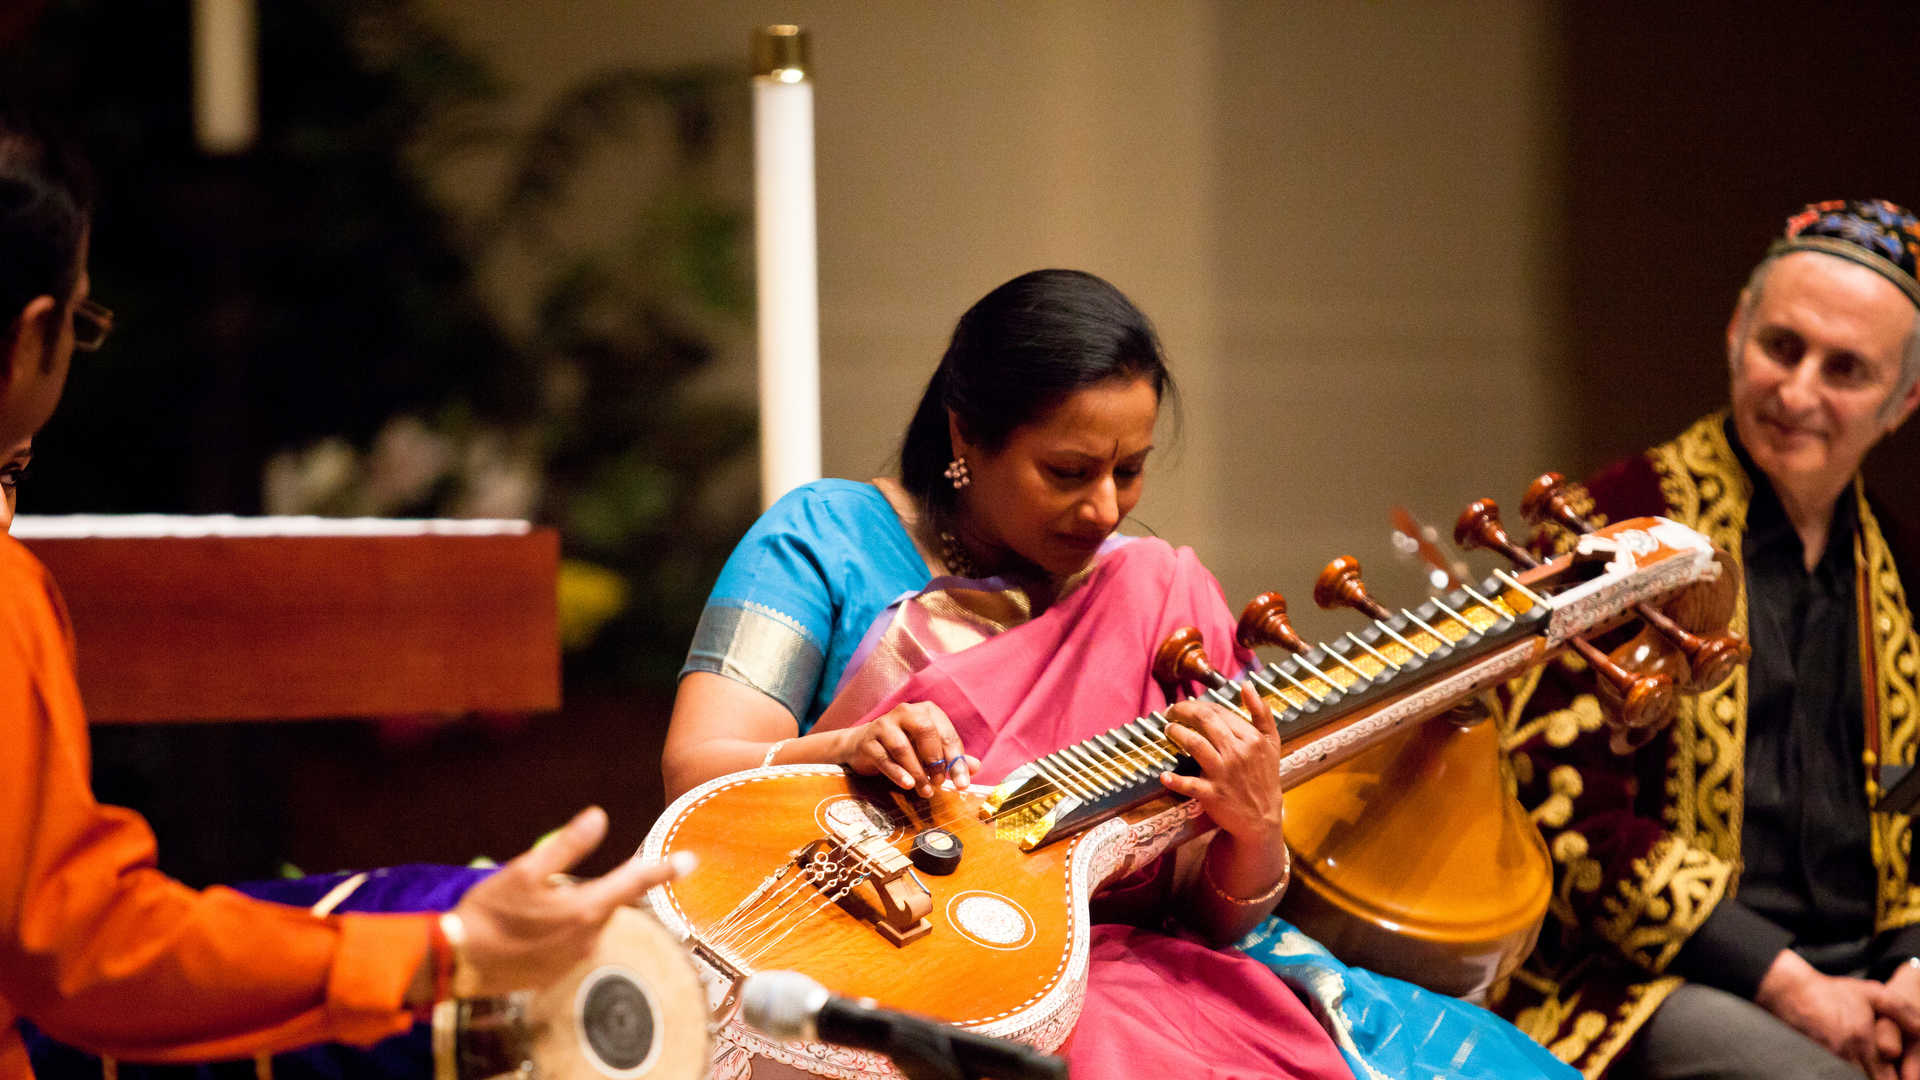 A Hindu musician plays an instrument during a concert on the St. Thomas campus.